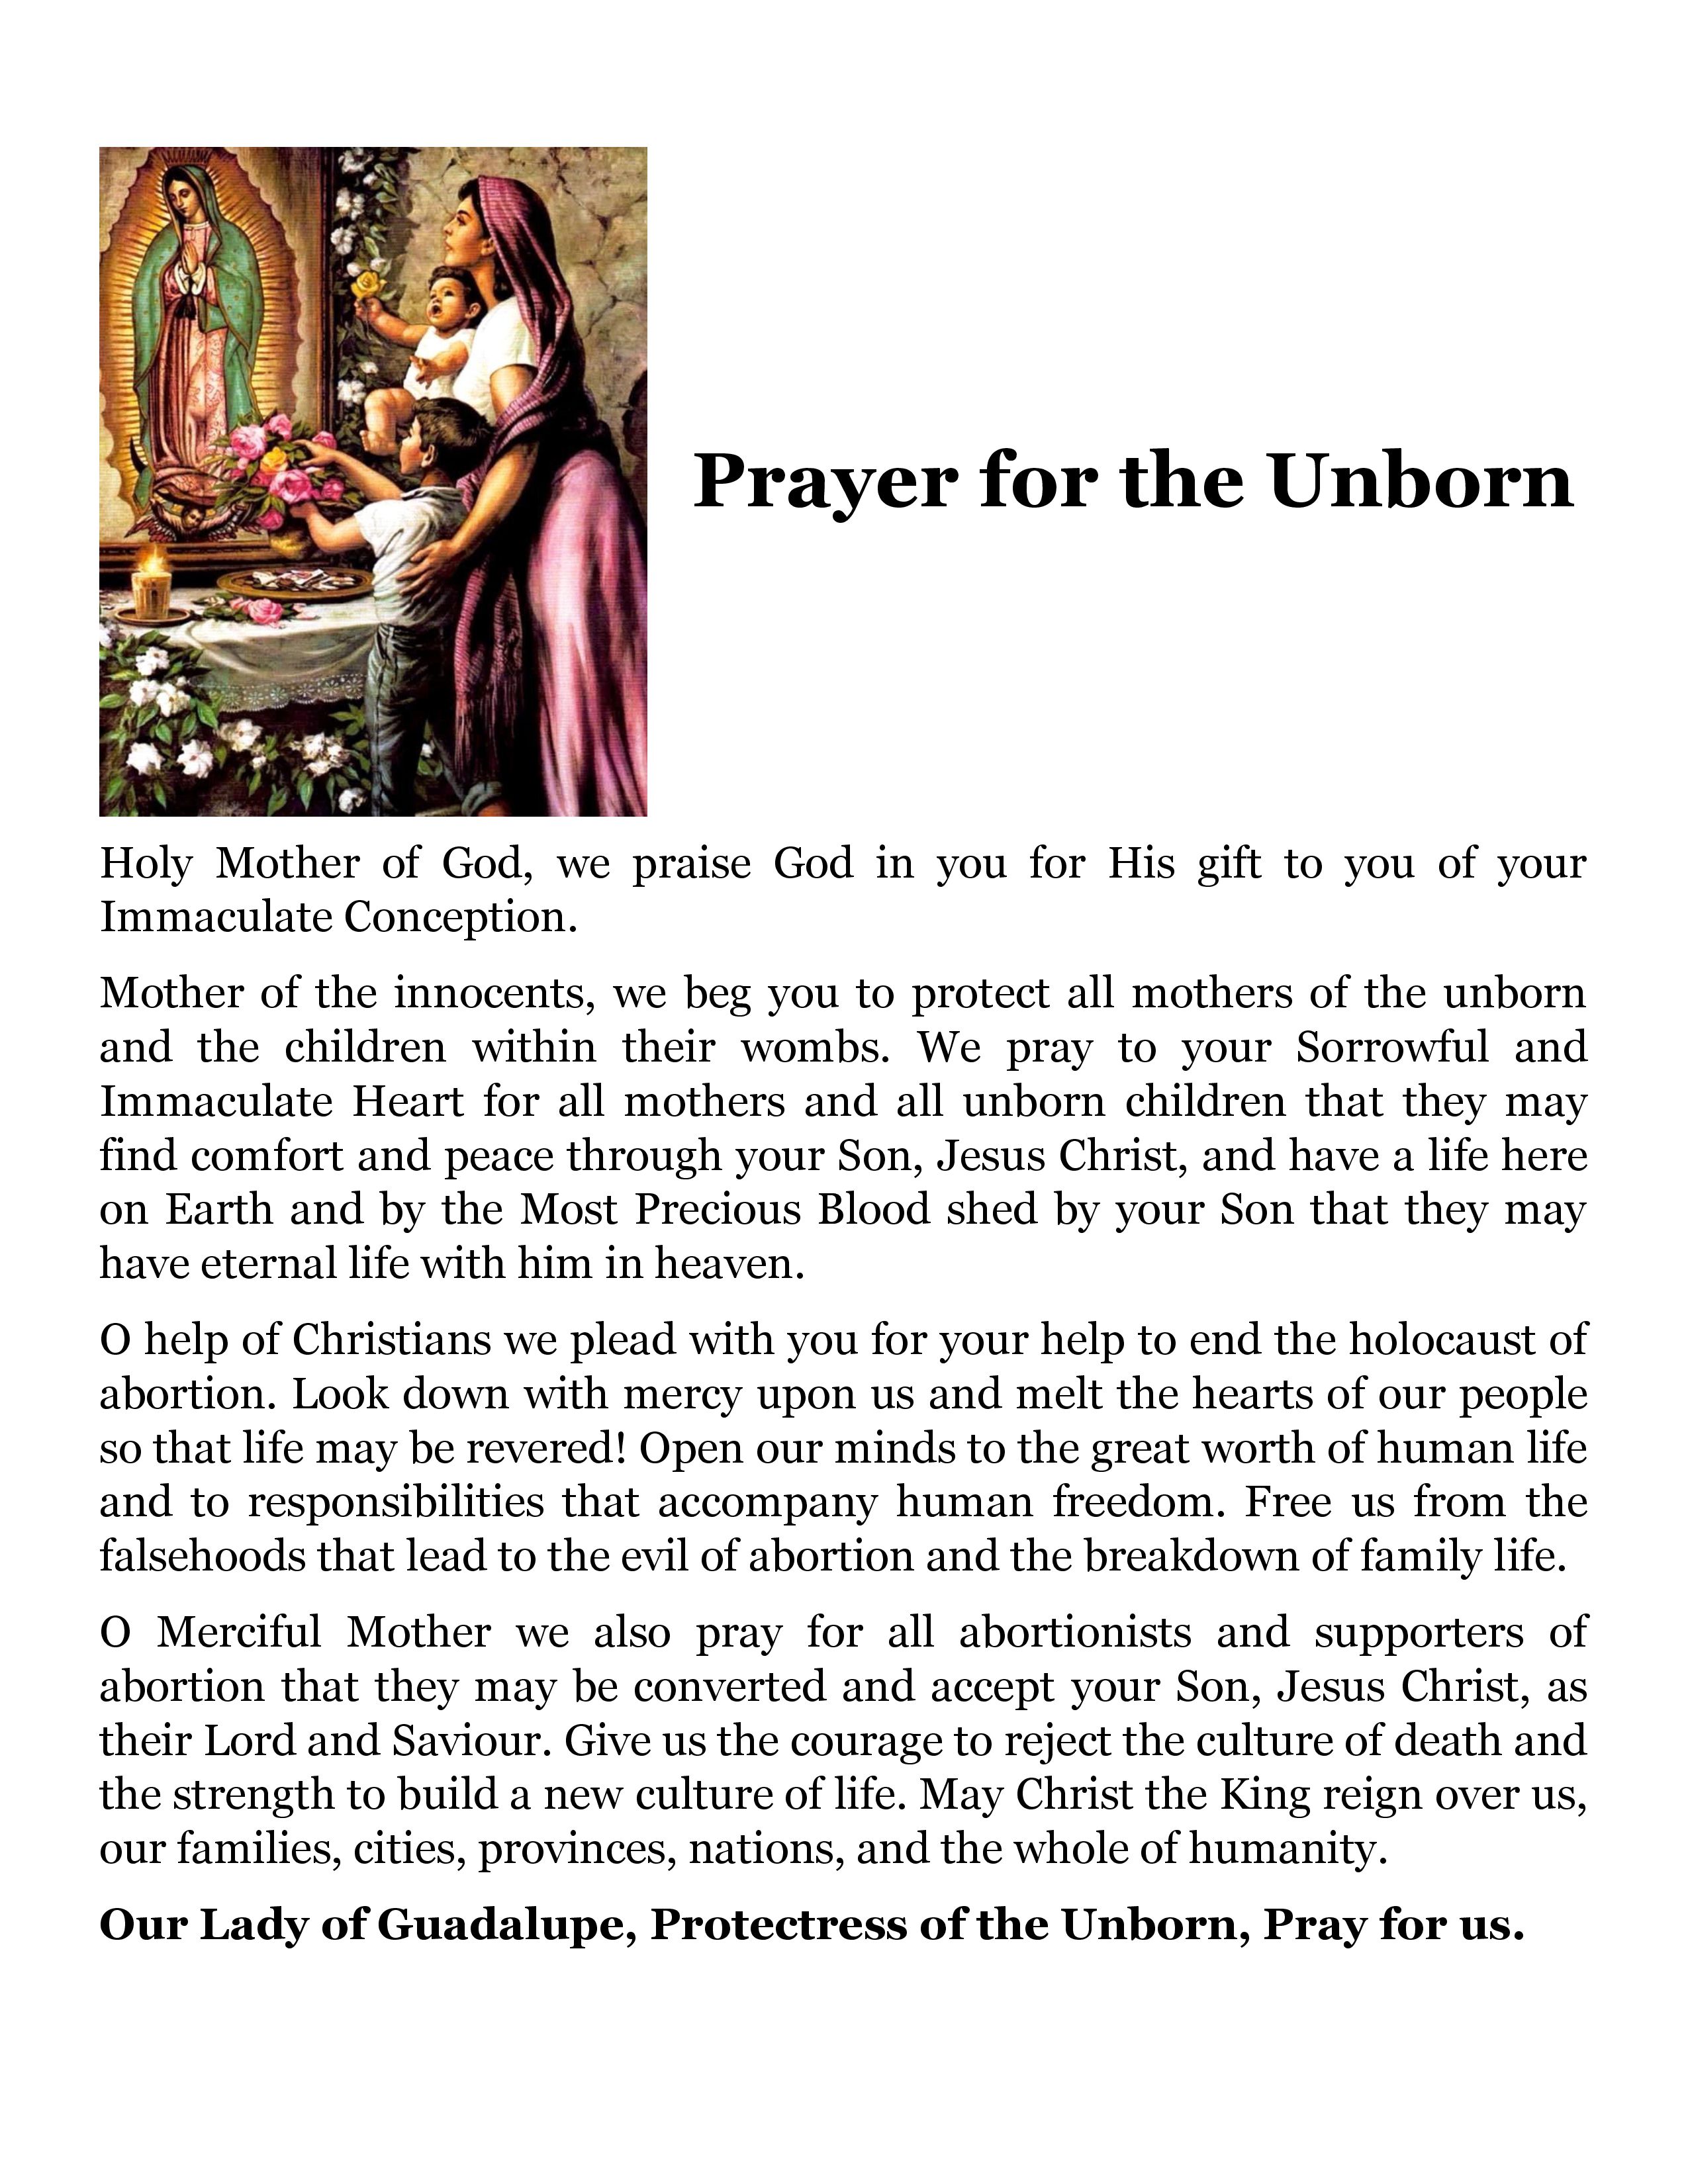 Prayer for the unborn